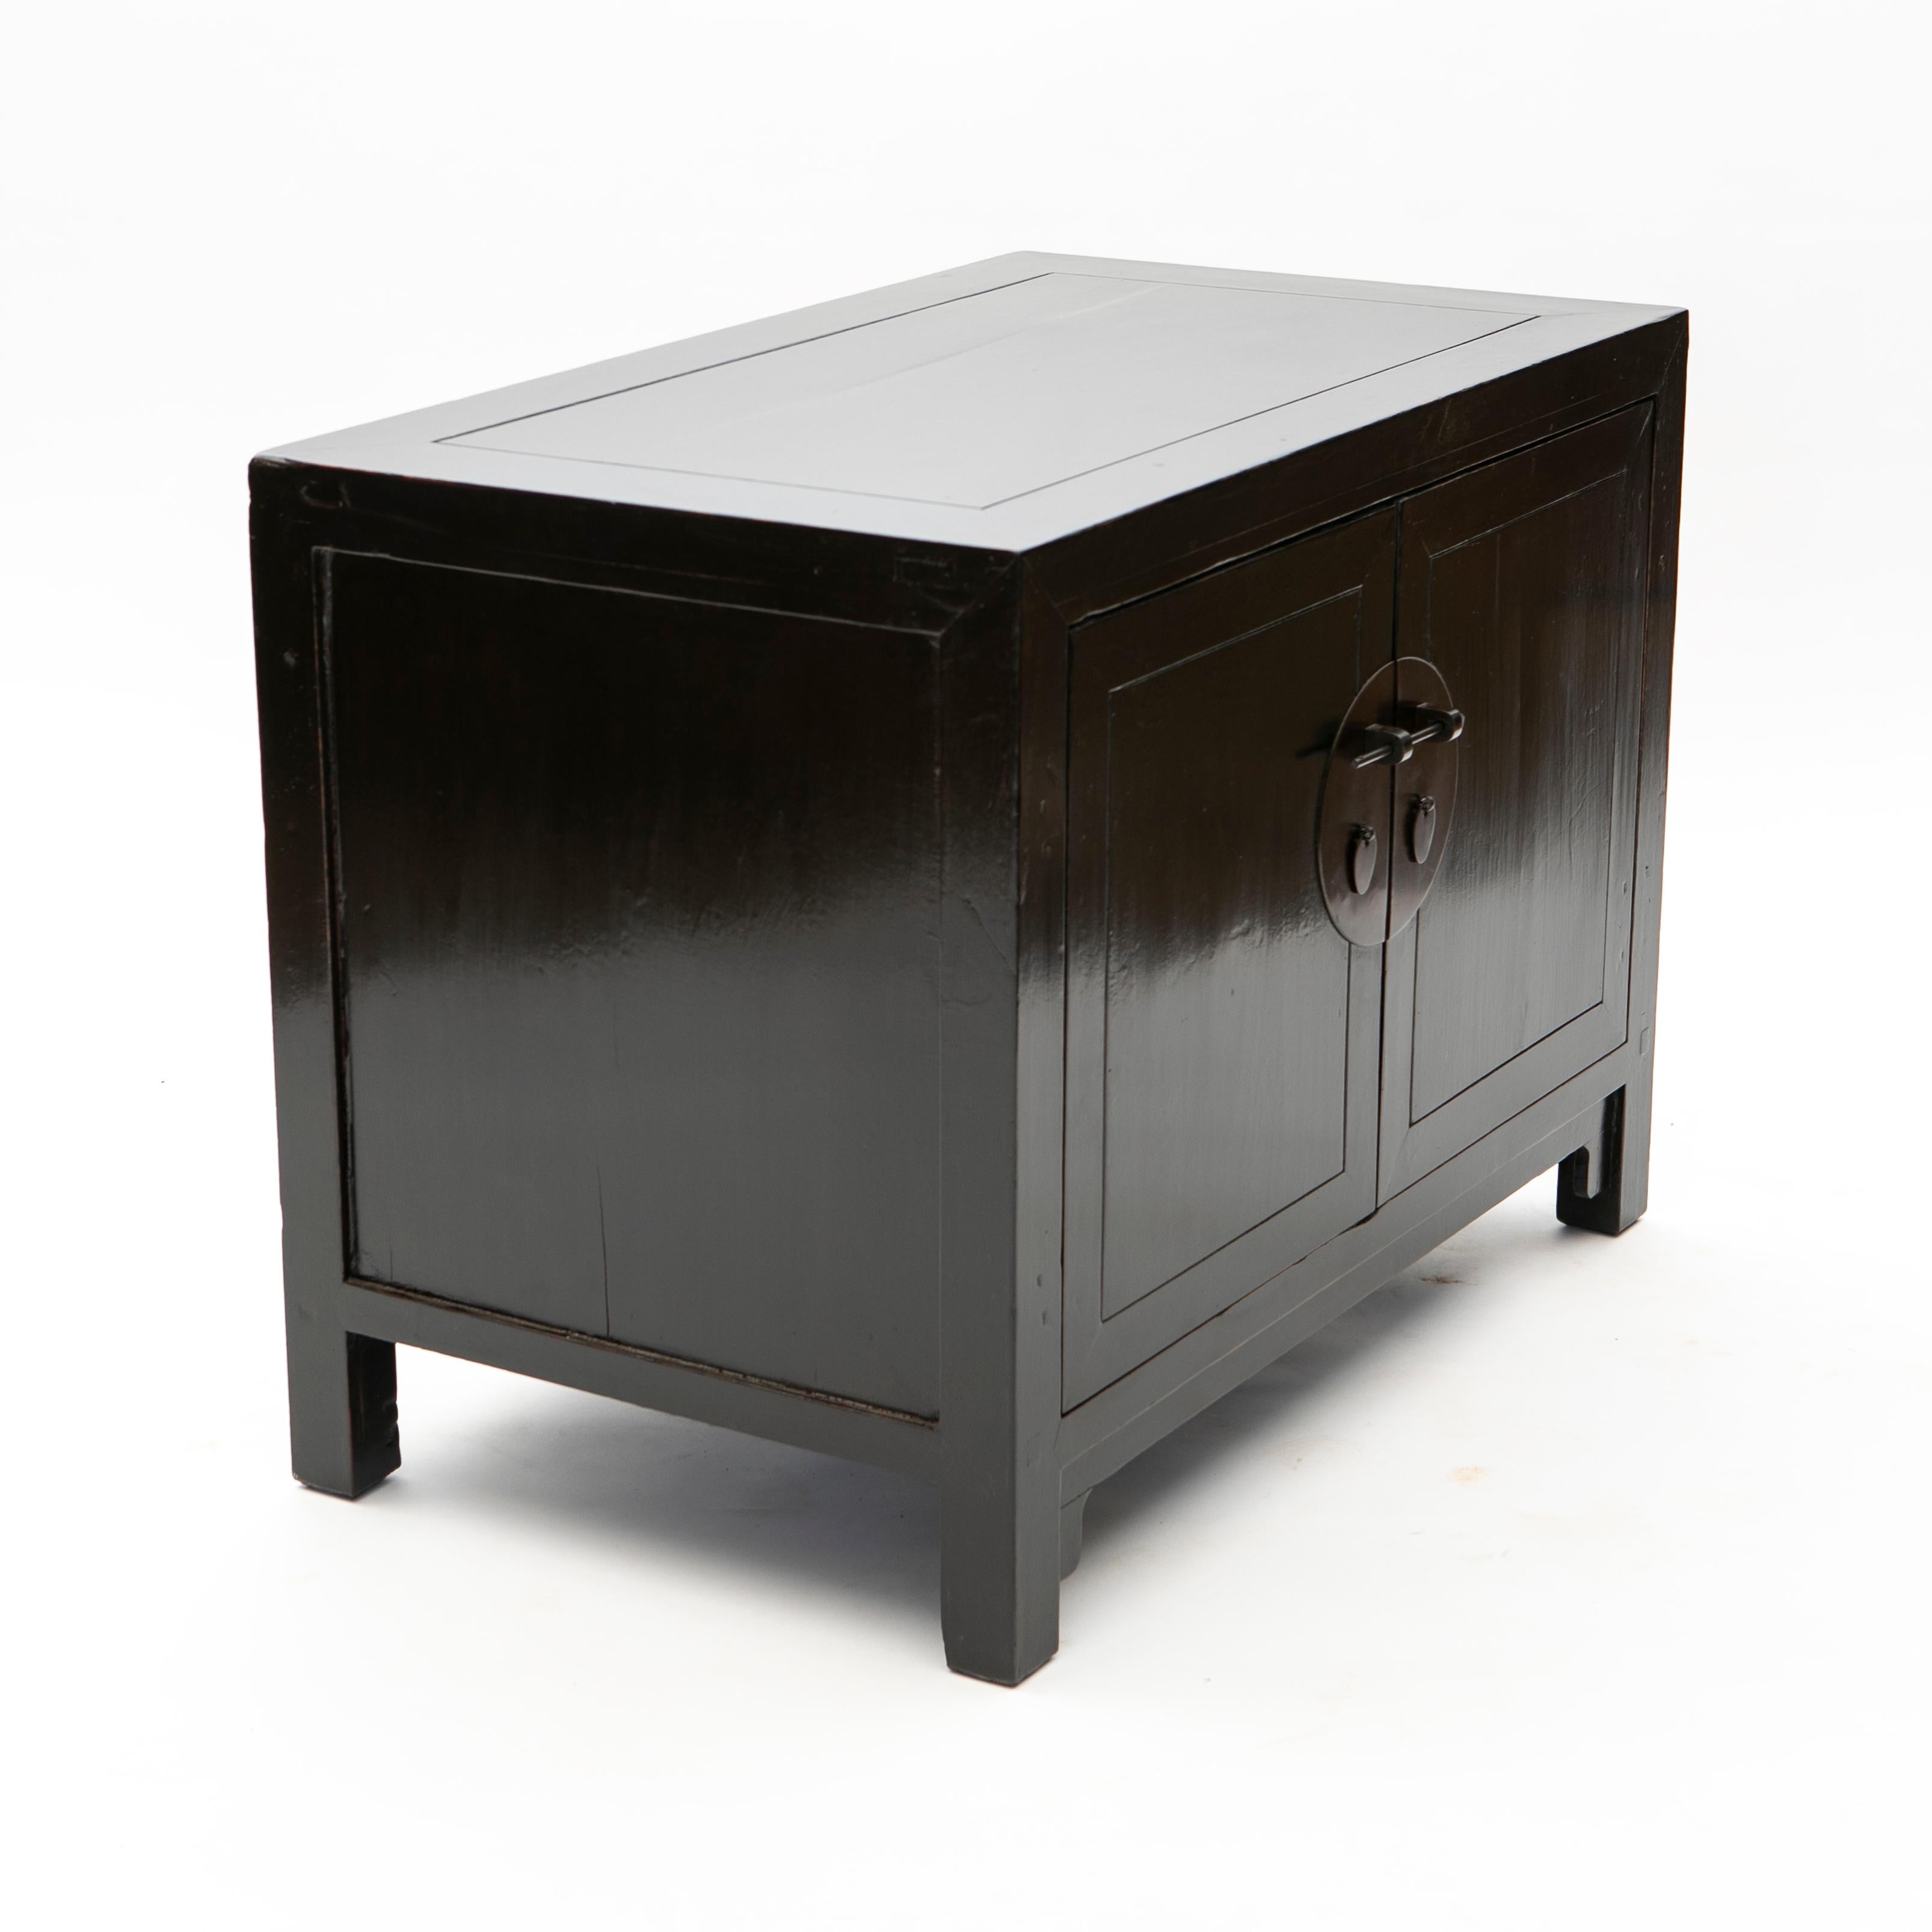 Chinese art deco elmwood sideboard having black lacquer.
A double door with large round metal central plate and pull handles. 

China approx. 1920